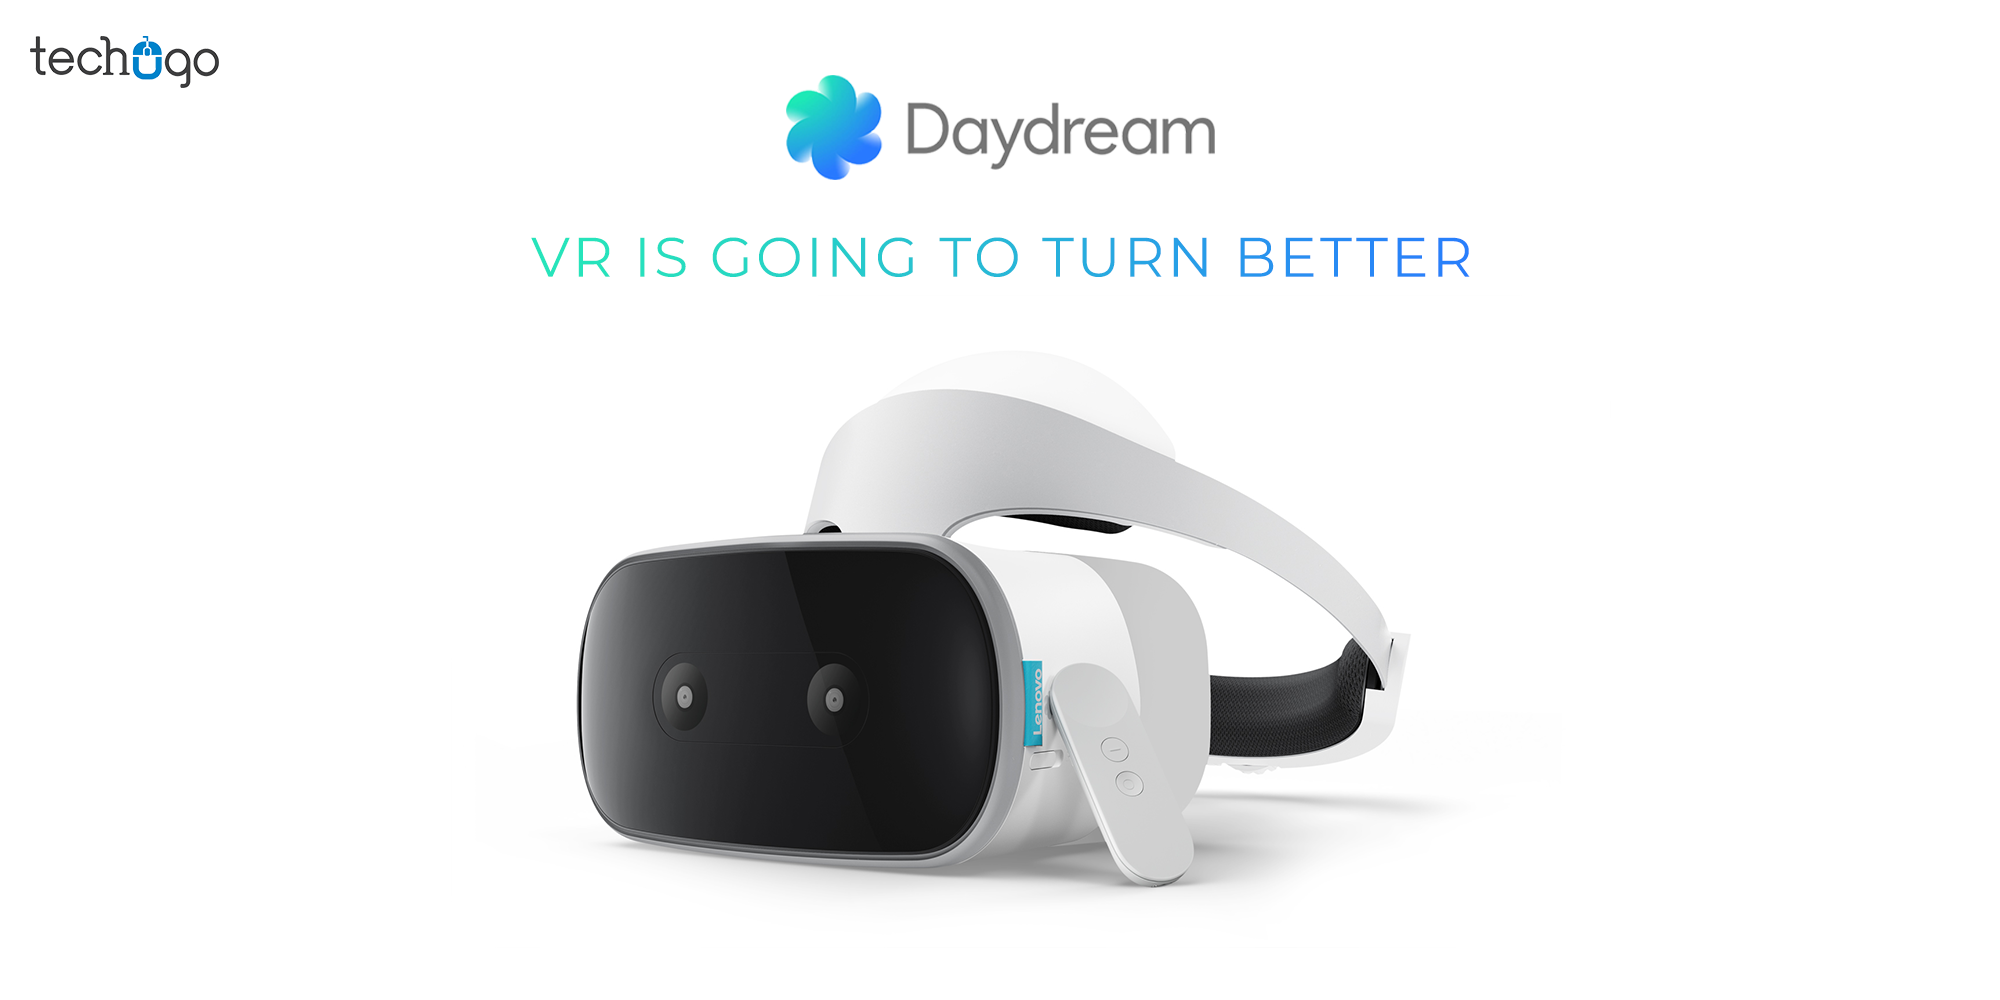 Daydream VR Is Going To Turn Better